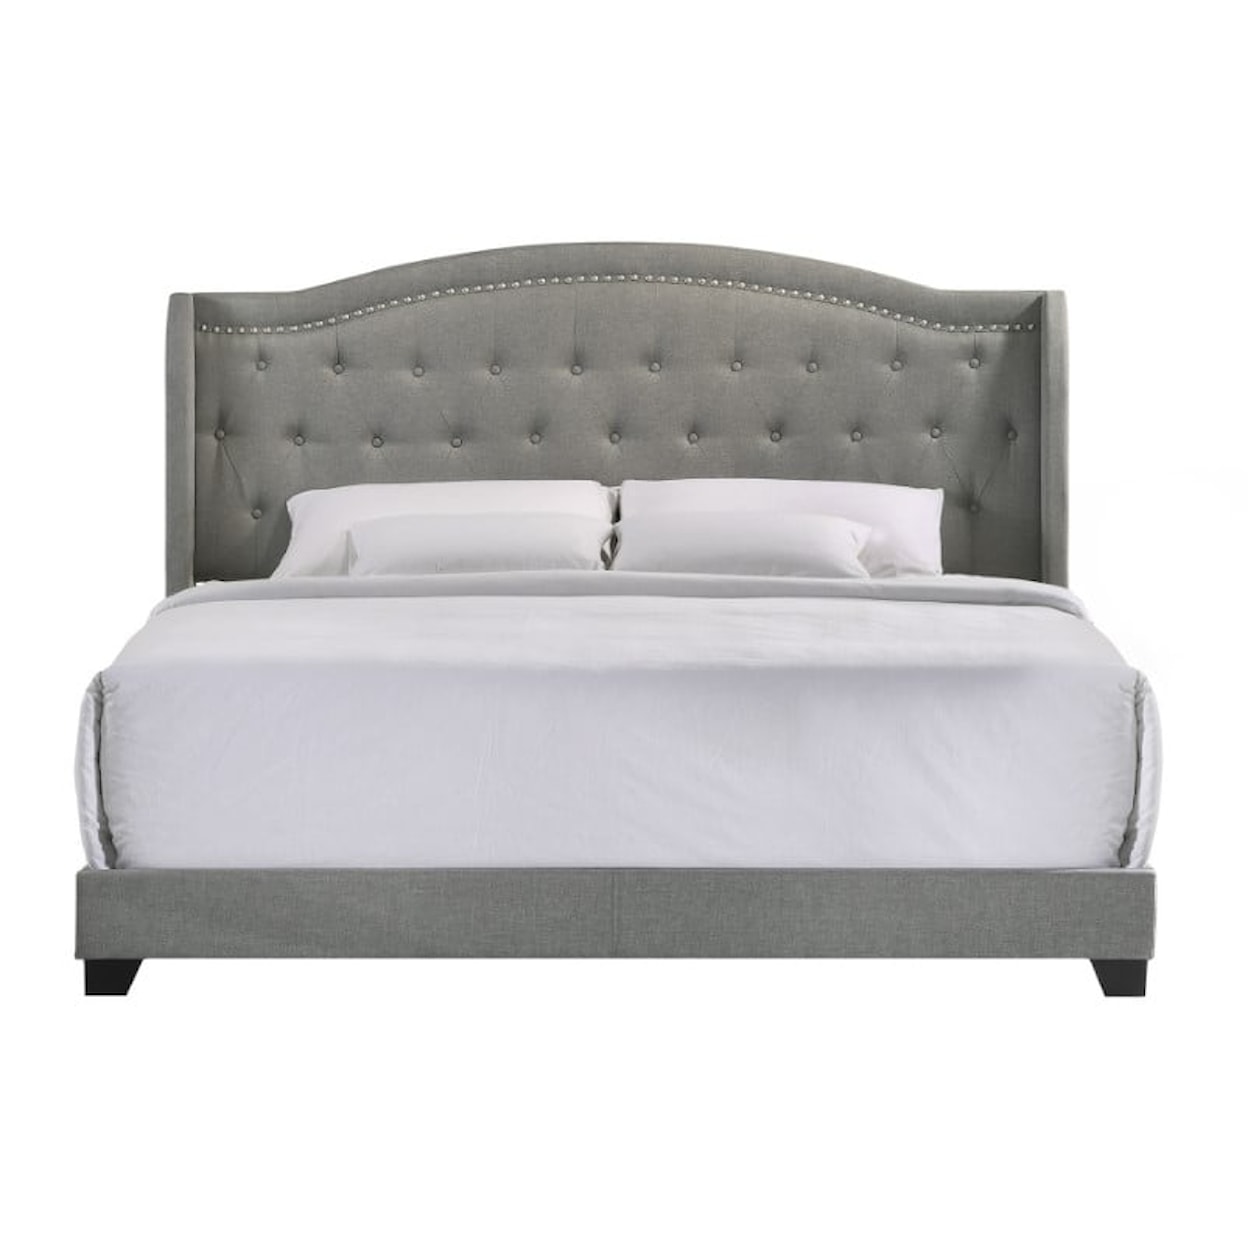 Intercon Upholstered Beds Rhyan King Upholstered Bed